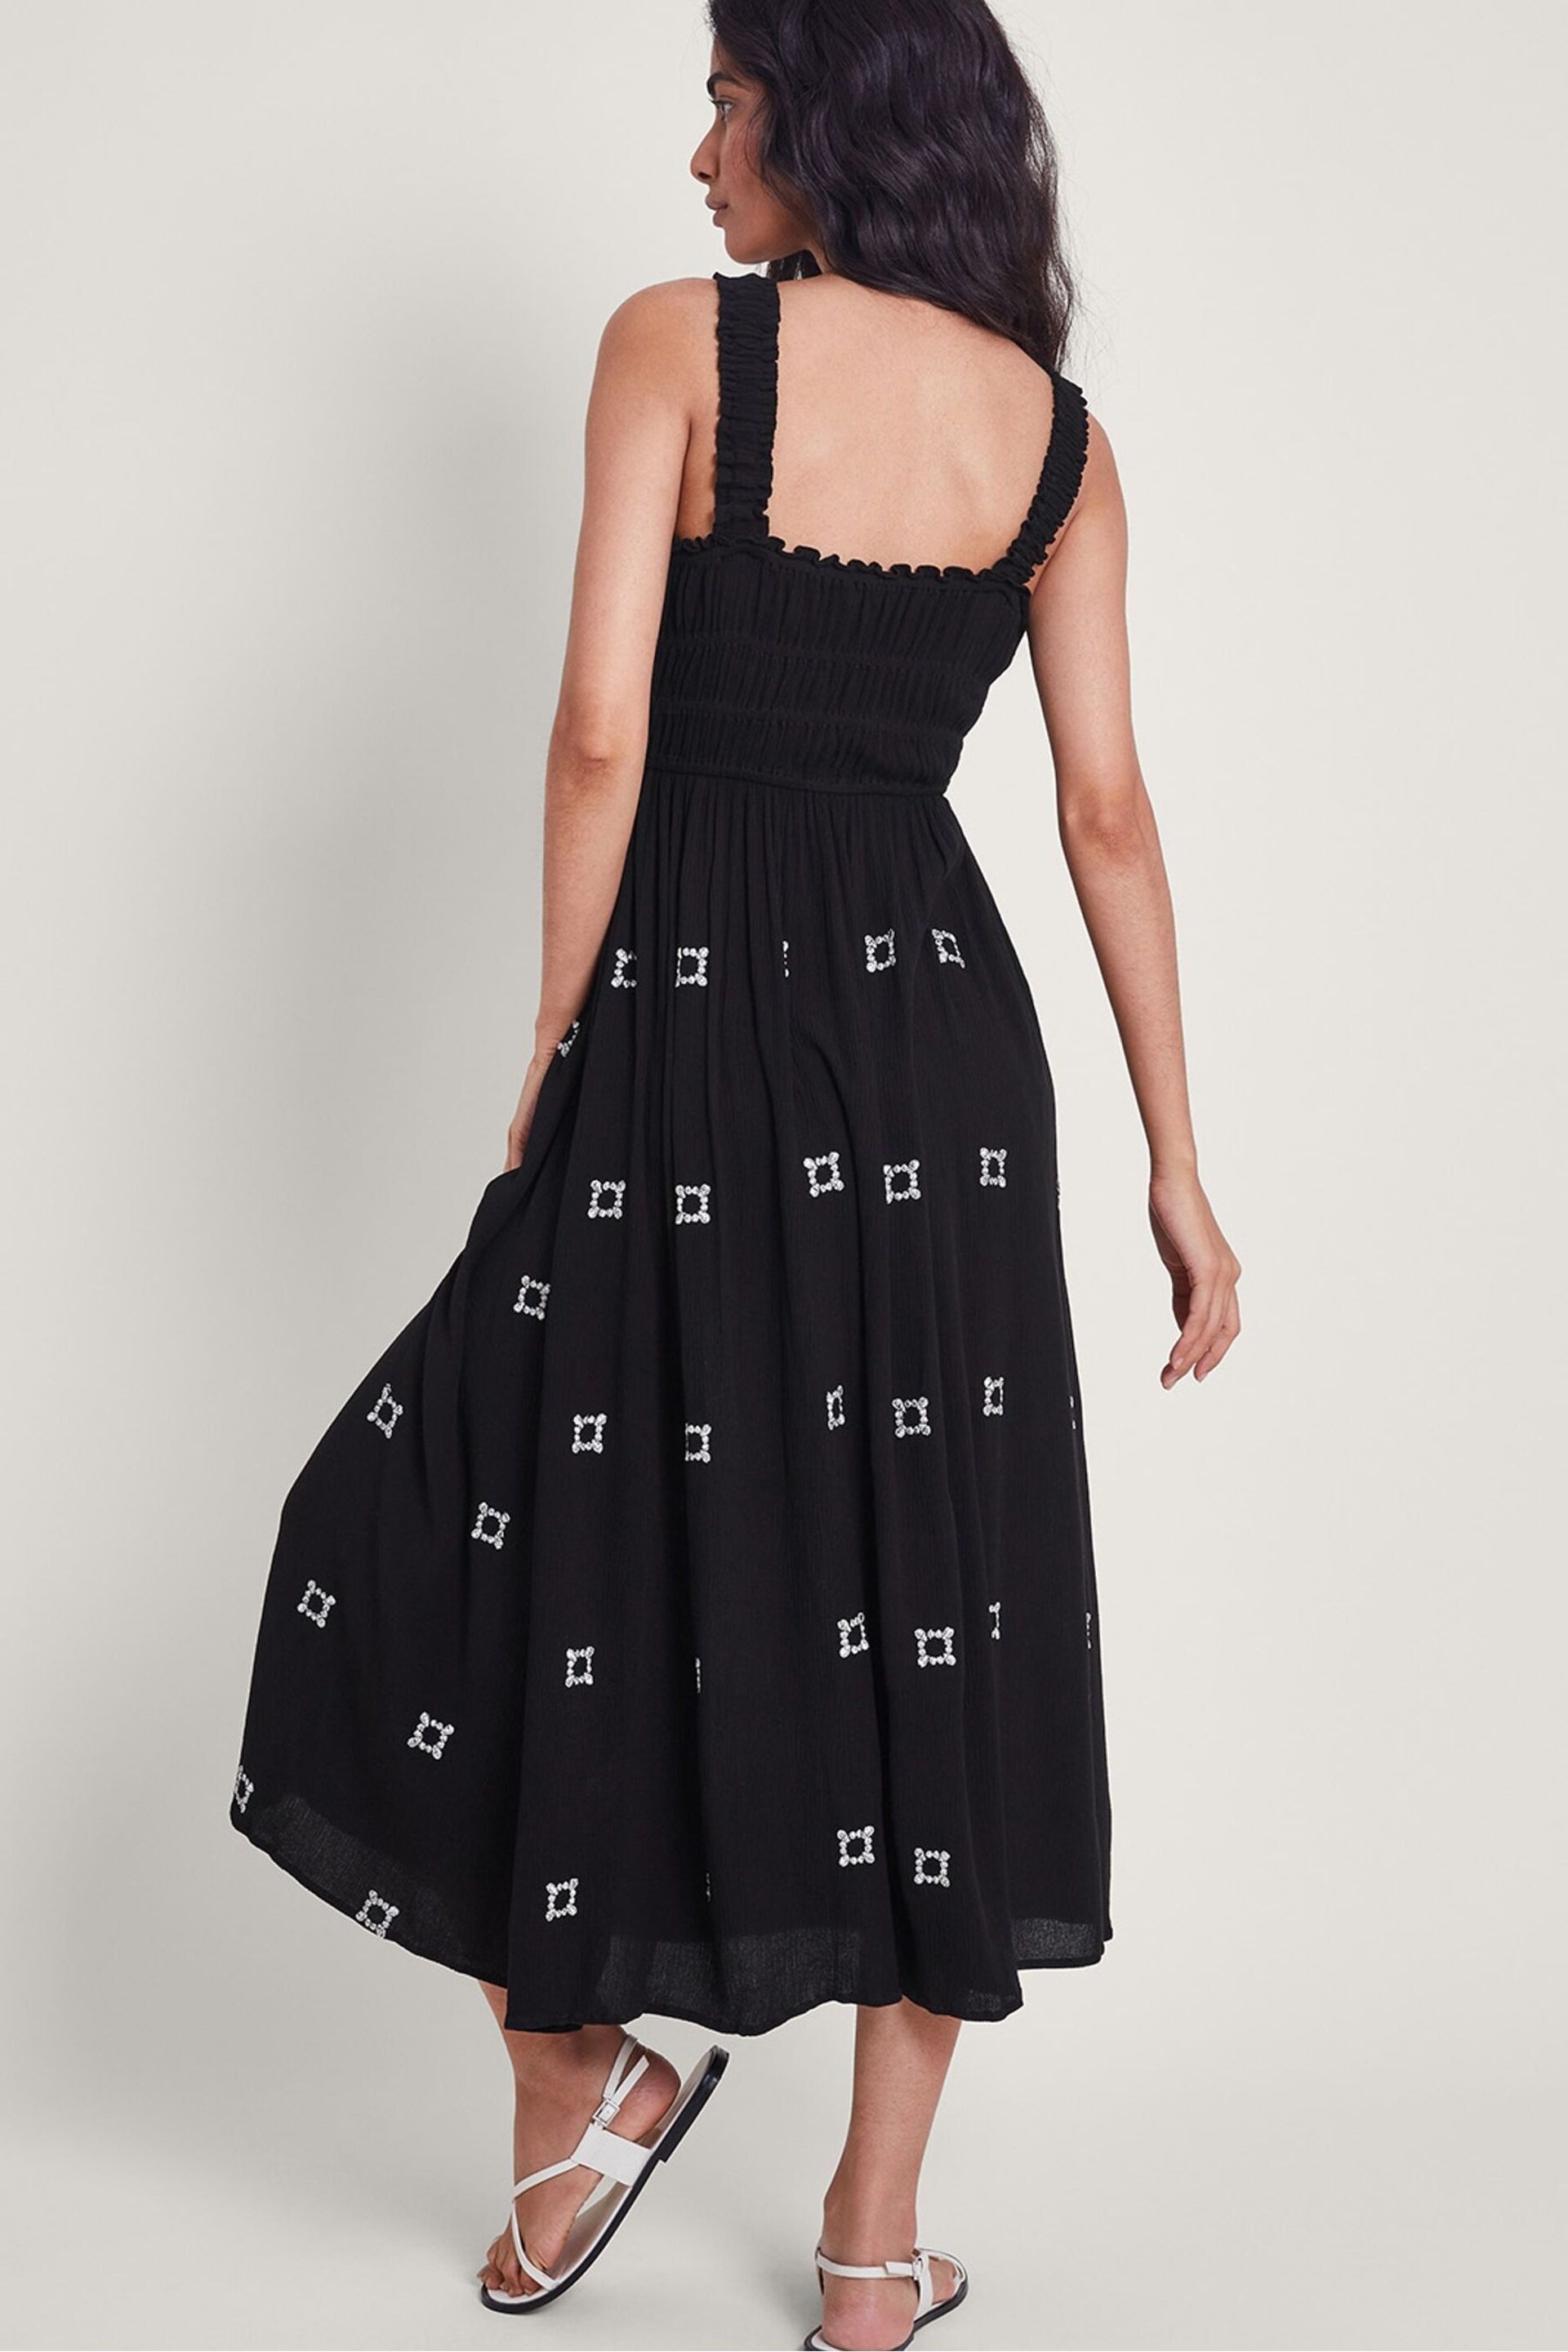 Monsoon Black Briar Embroidered Dress - Image 3 of 5